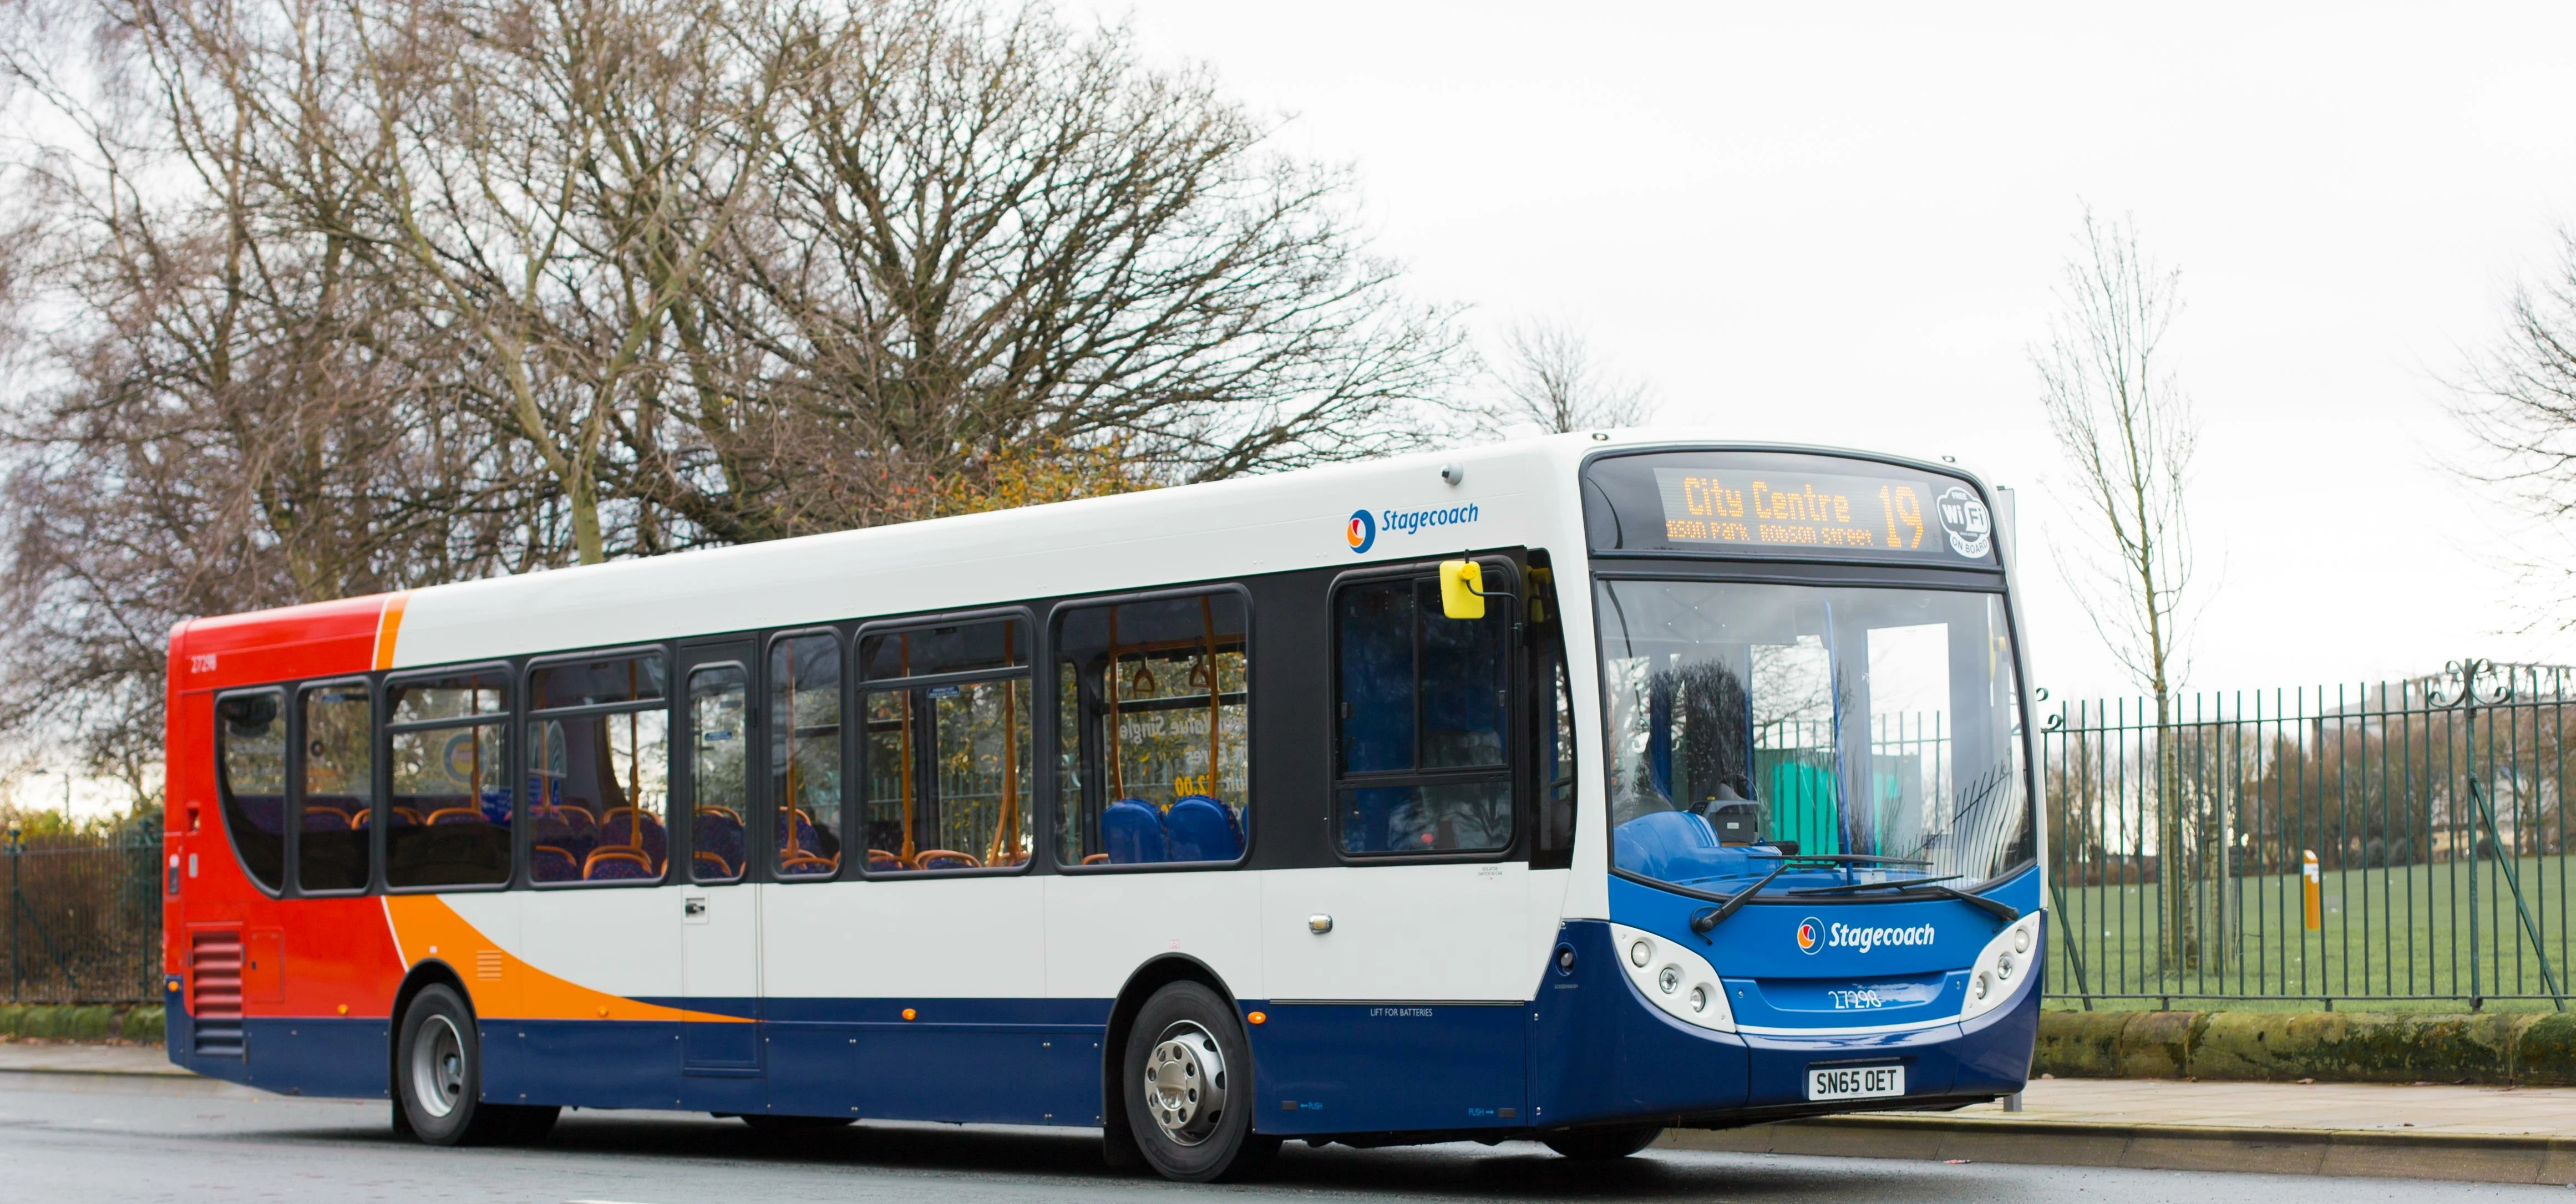 Stagecoach launch new mobile ticketing